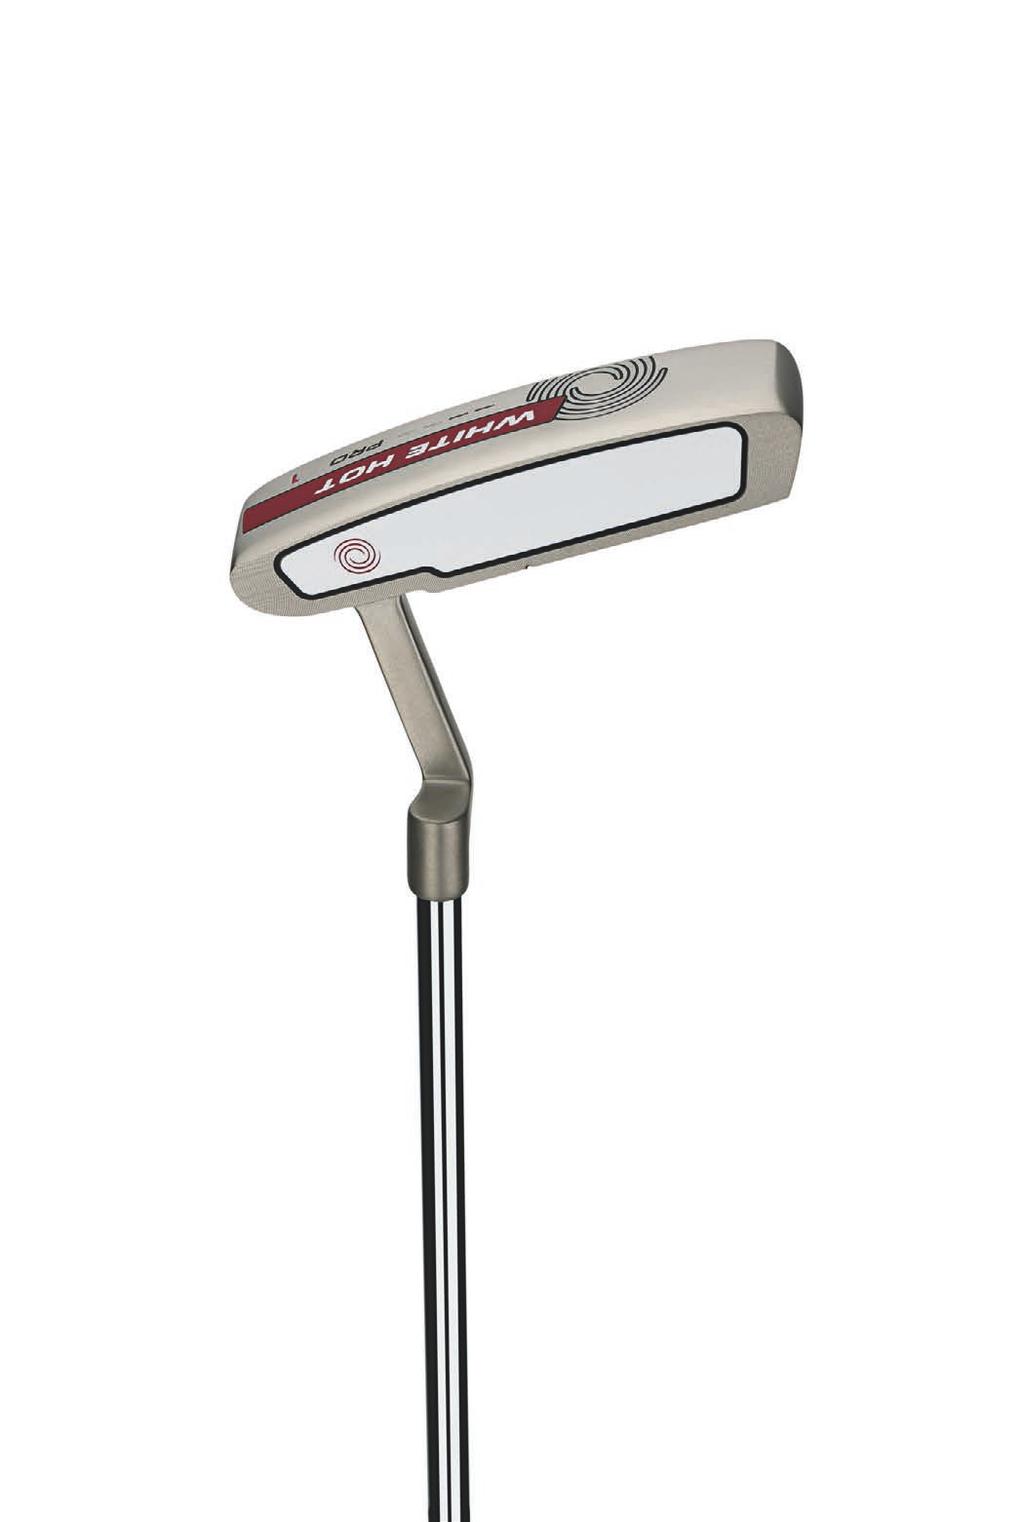 ODYSSEY PUTTERS WHITE HOT PRO 2.0 #1 In the White Hot Pro 2.